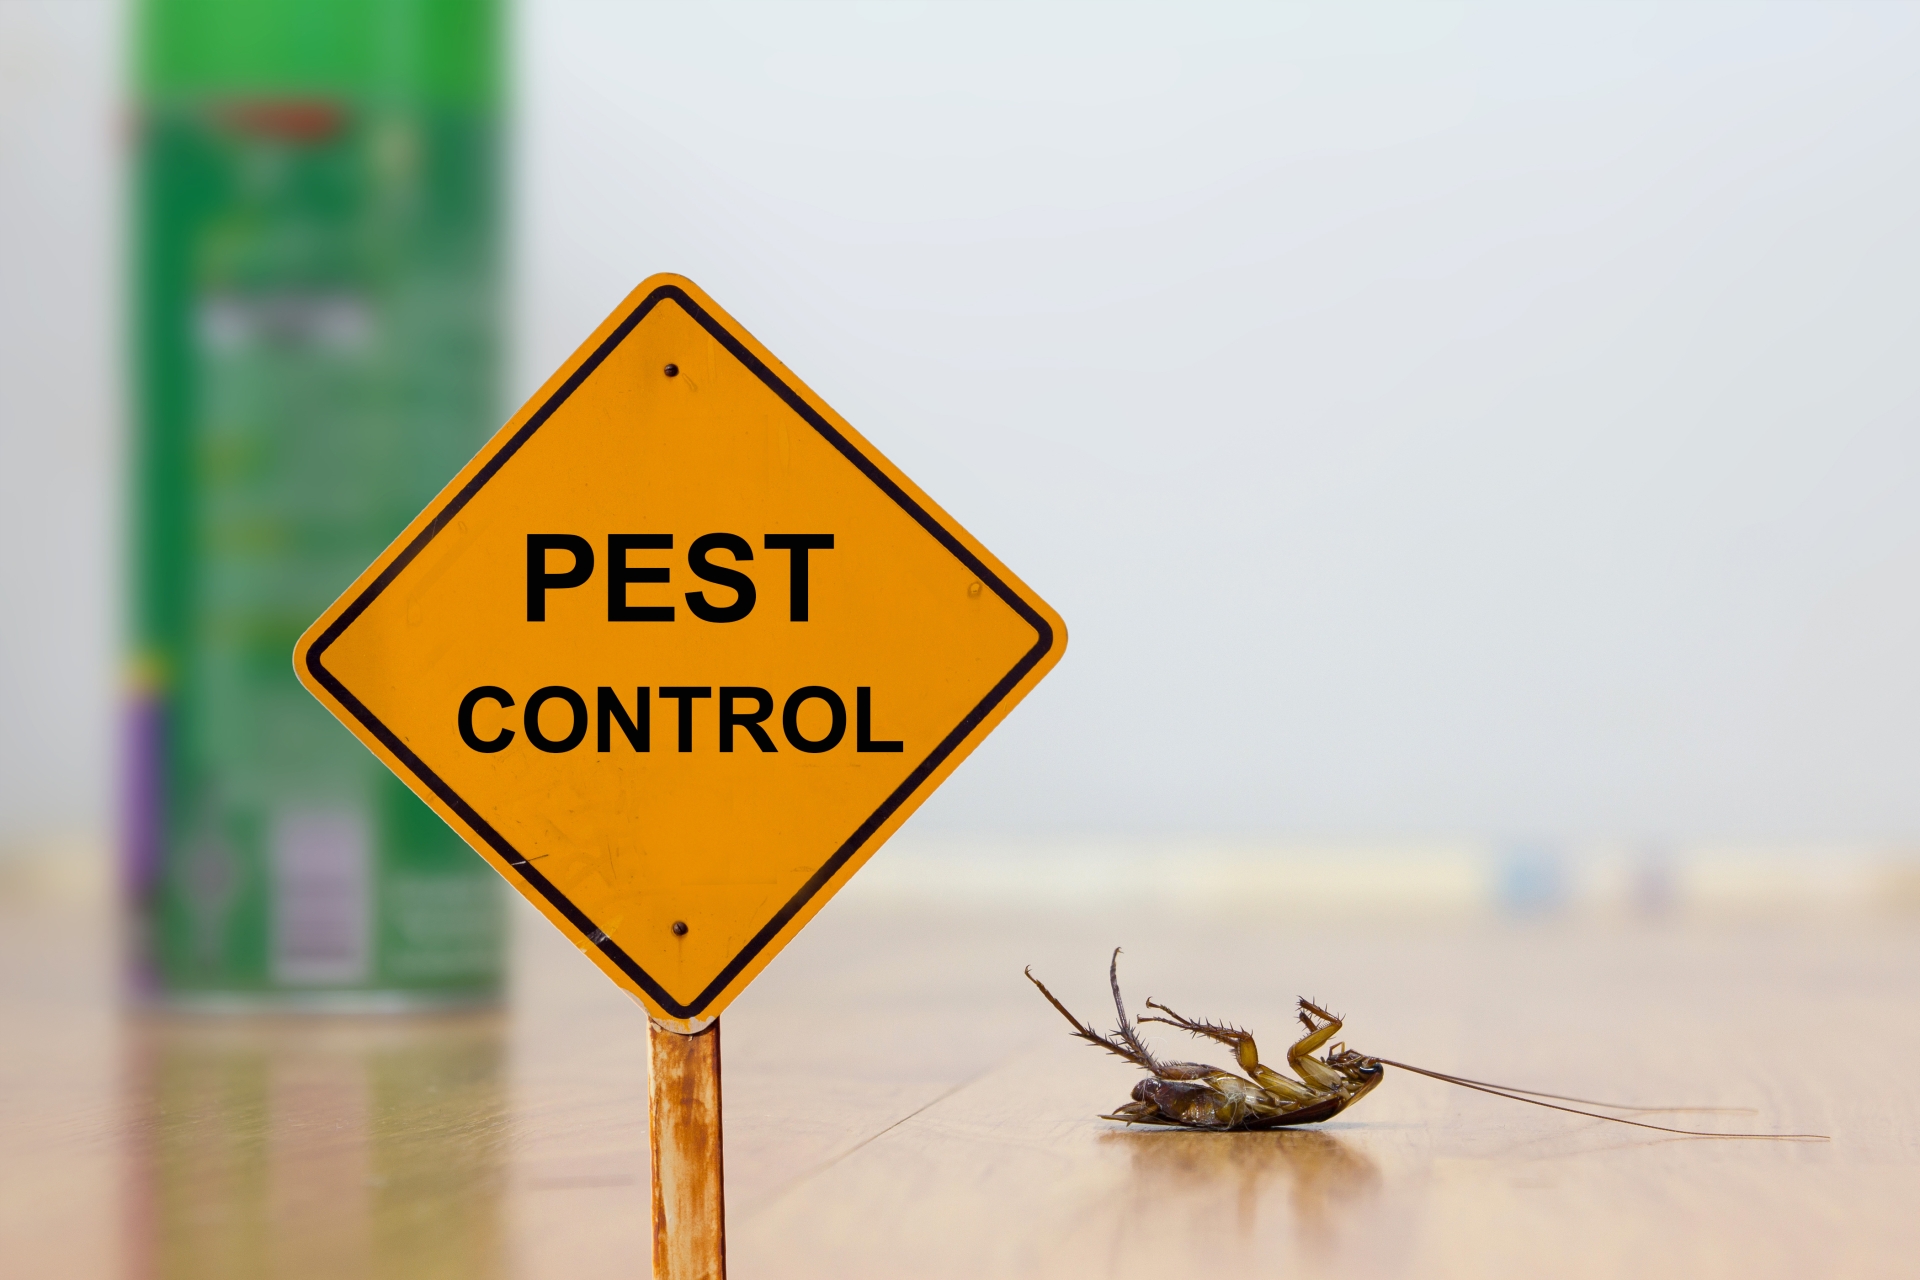 24 Hour Pest Control, Pest Control in Poplar, Isle of Dogs, Millwall, E14. Call Now 020 8166 9746